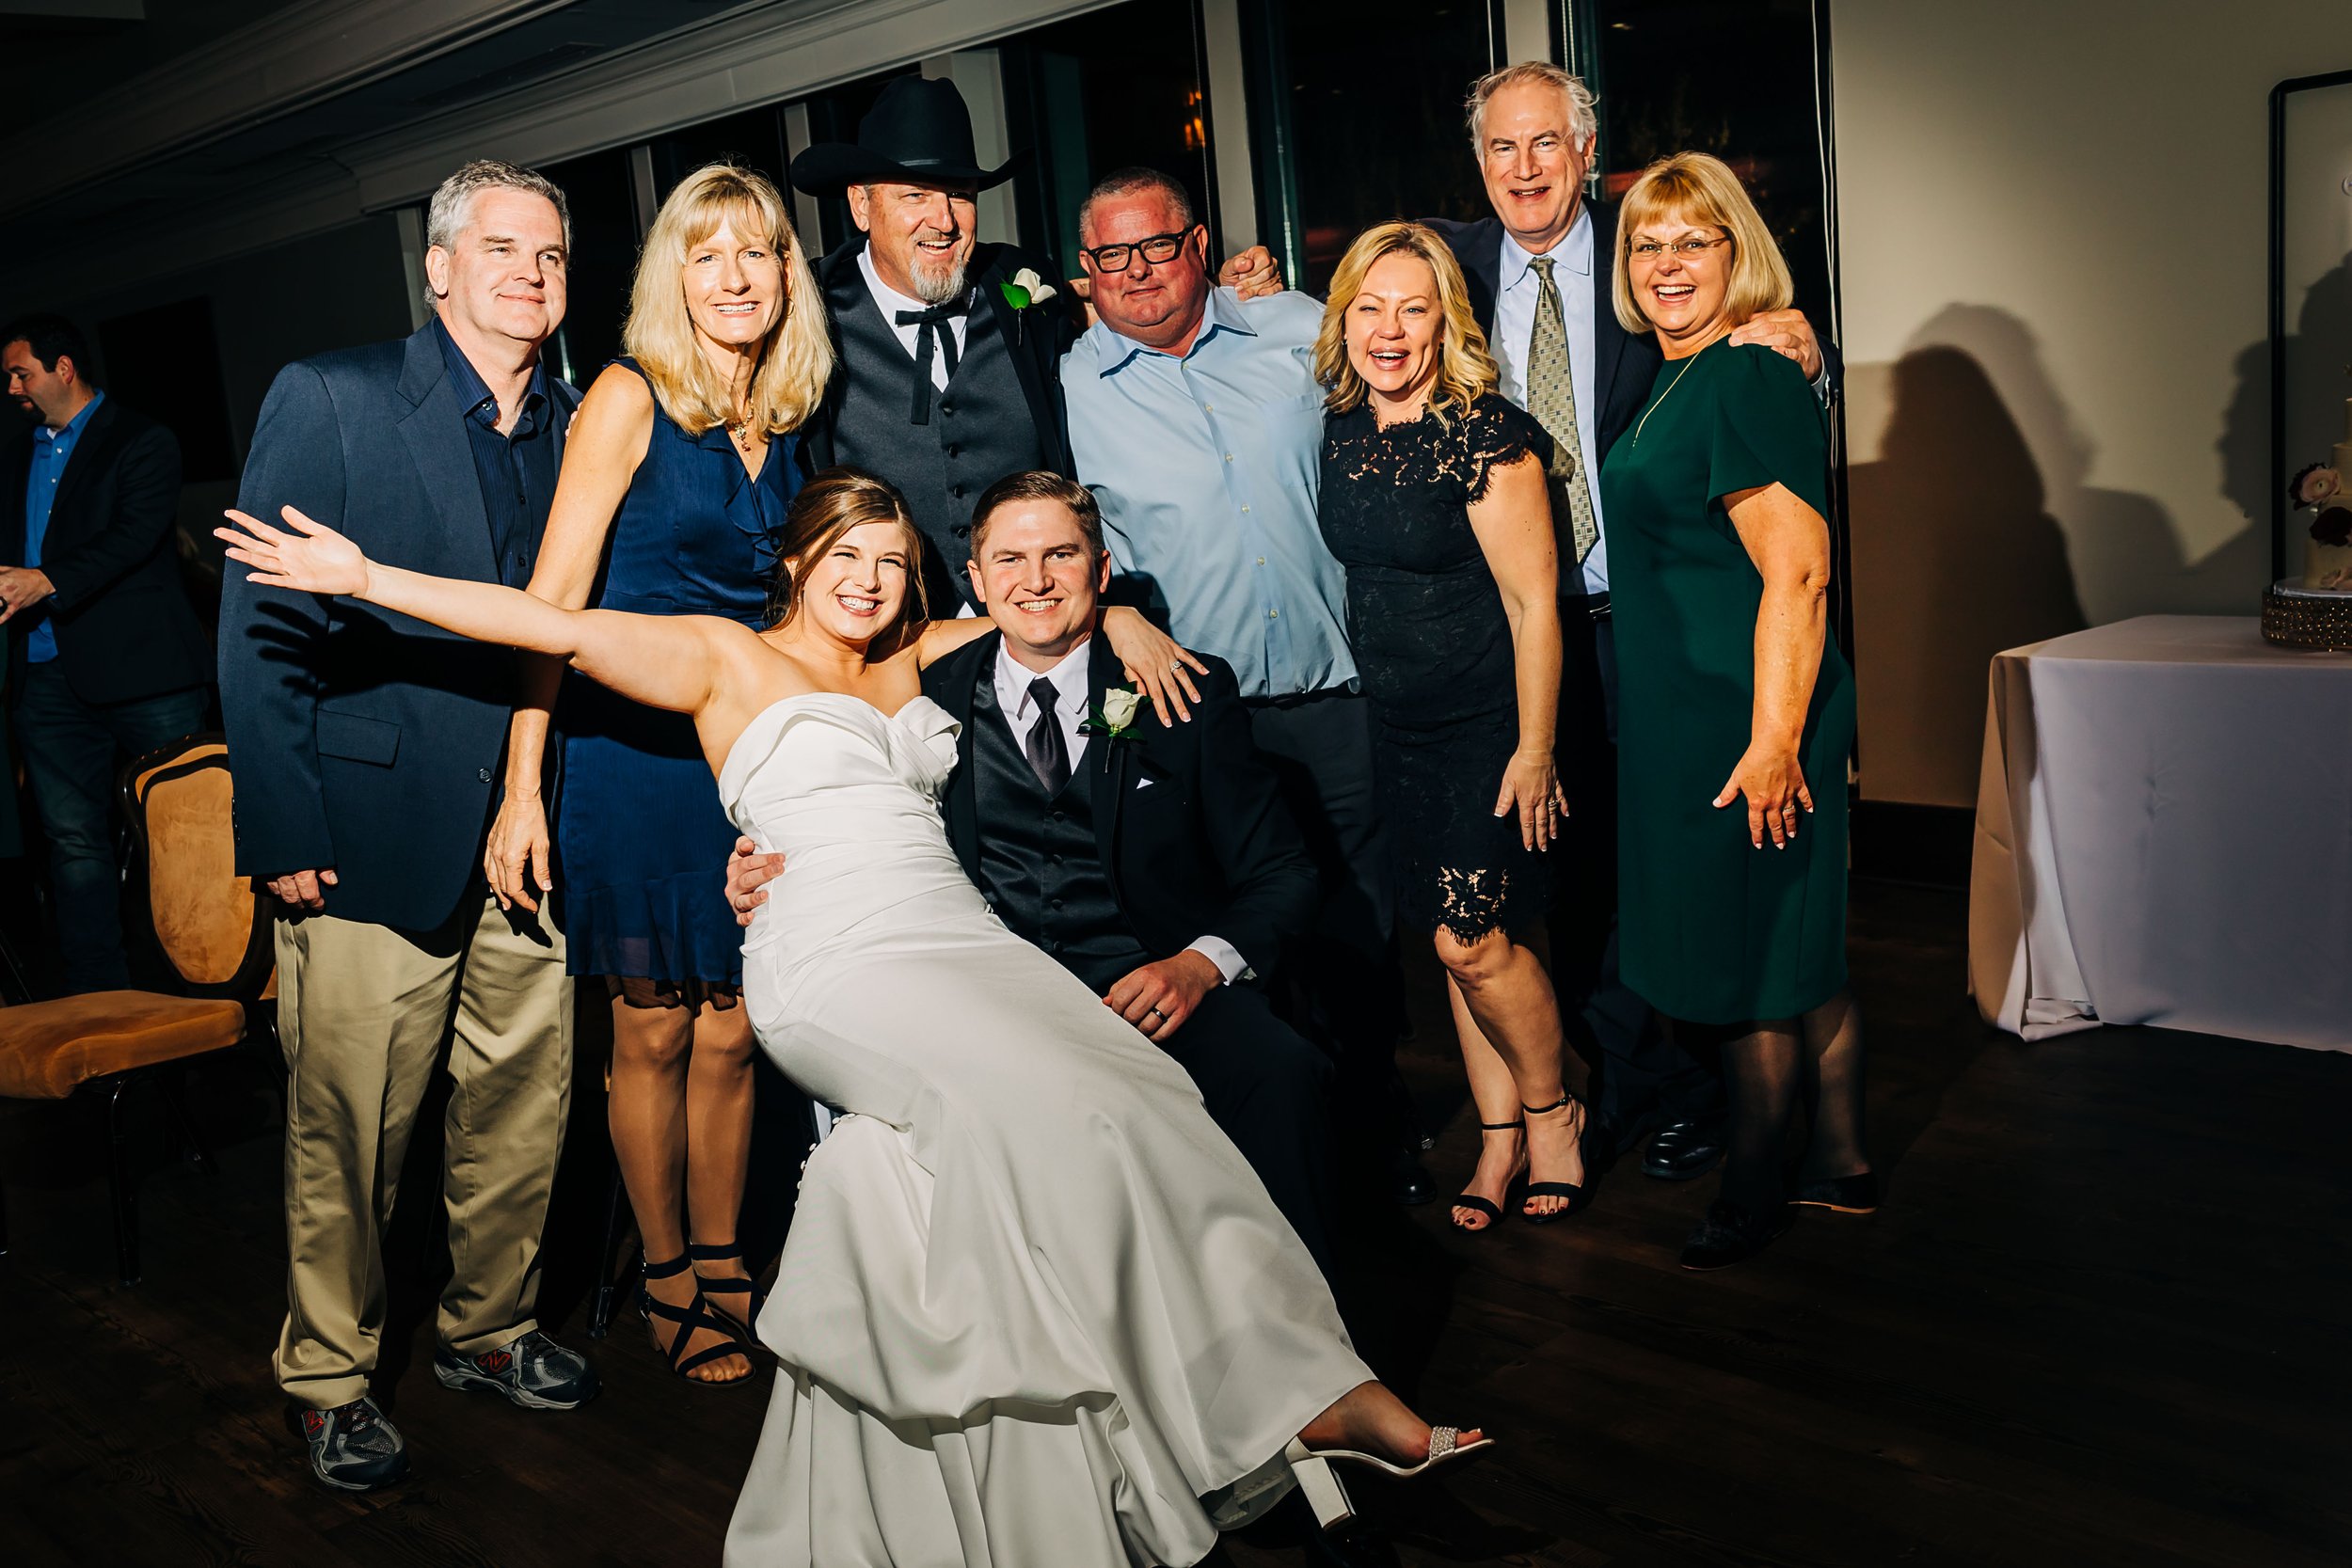  have you ever done a Photo Blitz at a wedding?  DJ plays a song and it’s a speed game to get everyone photographed during the song with the bride and groom. We went table to table and the photos aren’t perfect?  But they have a photo of themselves w